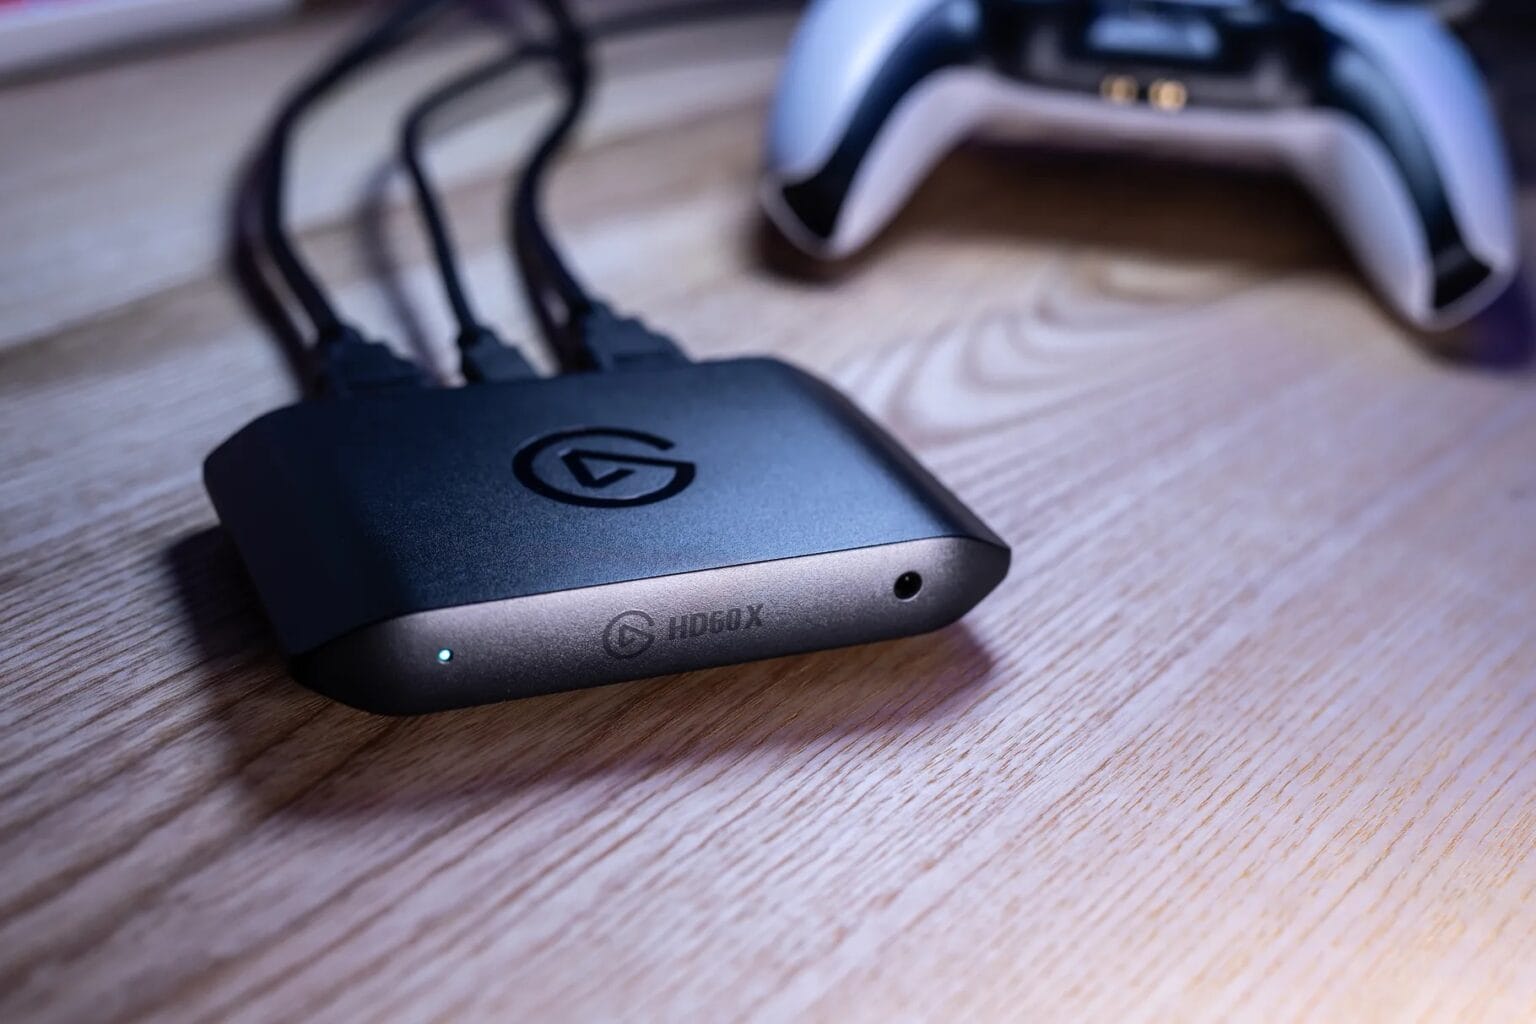 If you're looking to capture smooth gameplay footage, Elgato's new card might be for you.